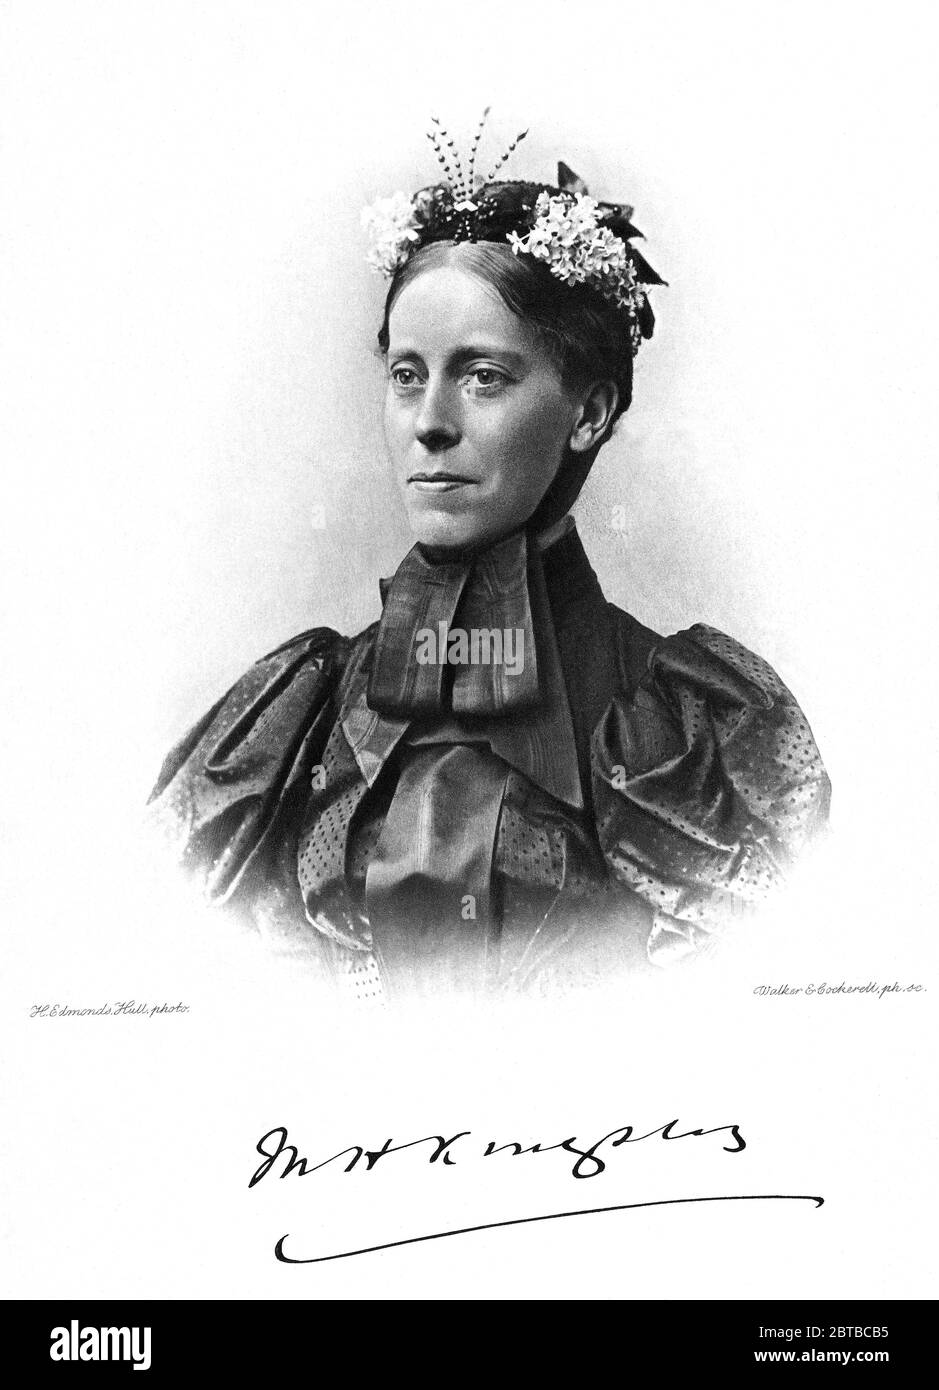 1898 ca, GREAT BRITAIN : MARY Henrietta KINGSLEY  ( 1862 – 1900 ) was an English writer and woman explorer who greatly influenced European ideas about Africa and African people . Daughter of traveller and english writer George Kingsley , niece of celebrated novellist Charles Kingsley . Photo by H. Edmonds Hull .- LETTERATO - SCRITTORE - LETTERATURA - Literature - PORTRAIT - RITRATTO - SCRITTRICE - EXPLORER - ESPLORATRICE - hat - cappello - autografo - autograph - firma - signature --- Archivio GBB Stock Photo